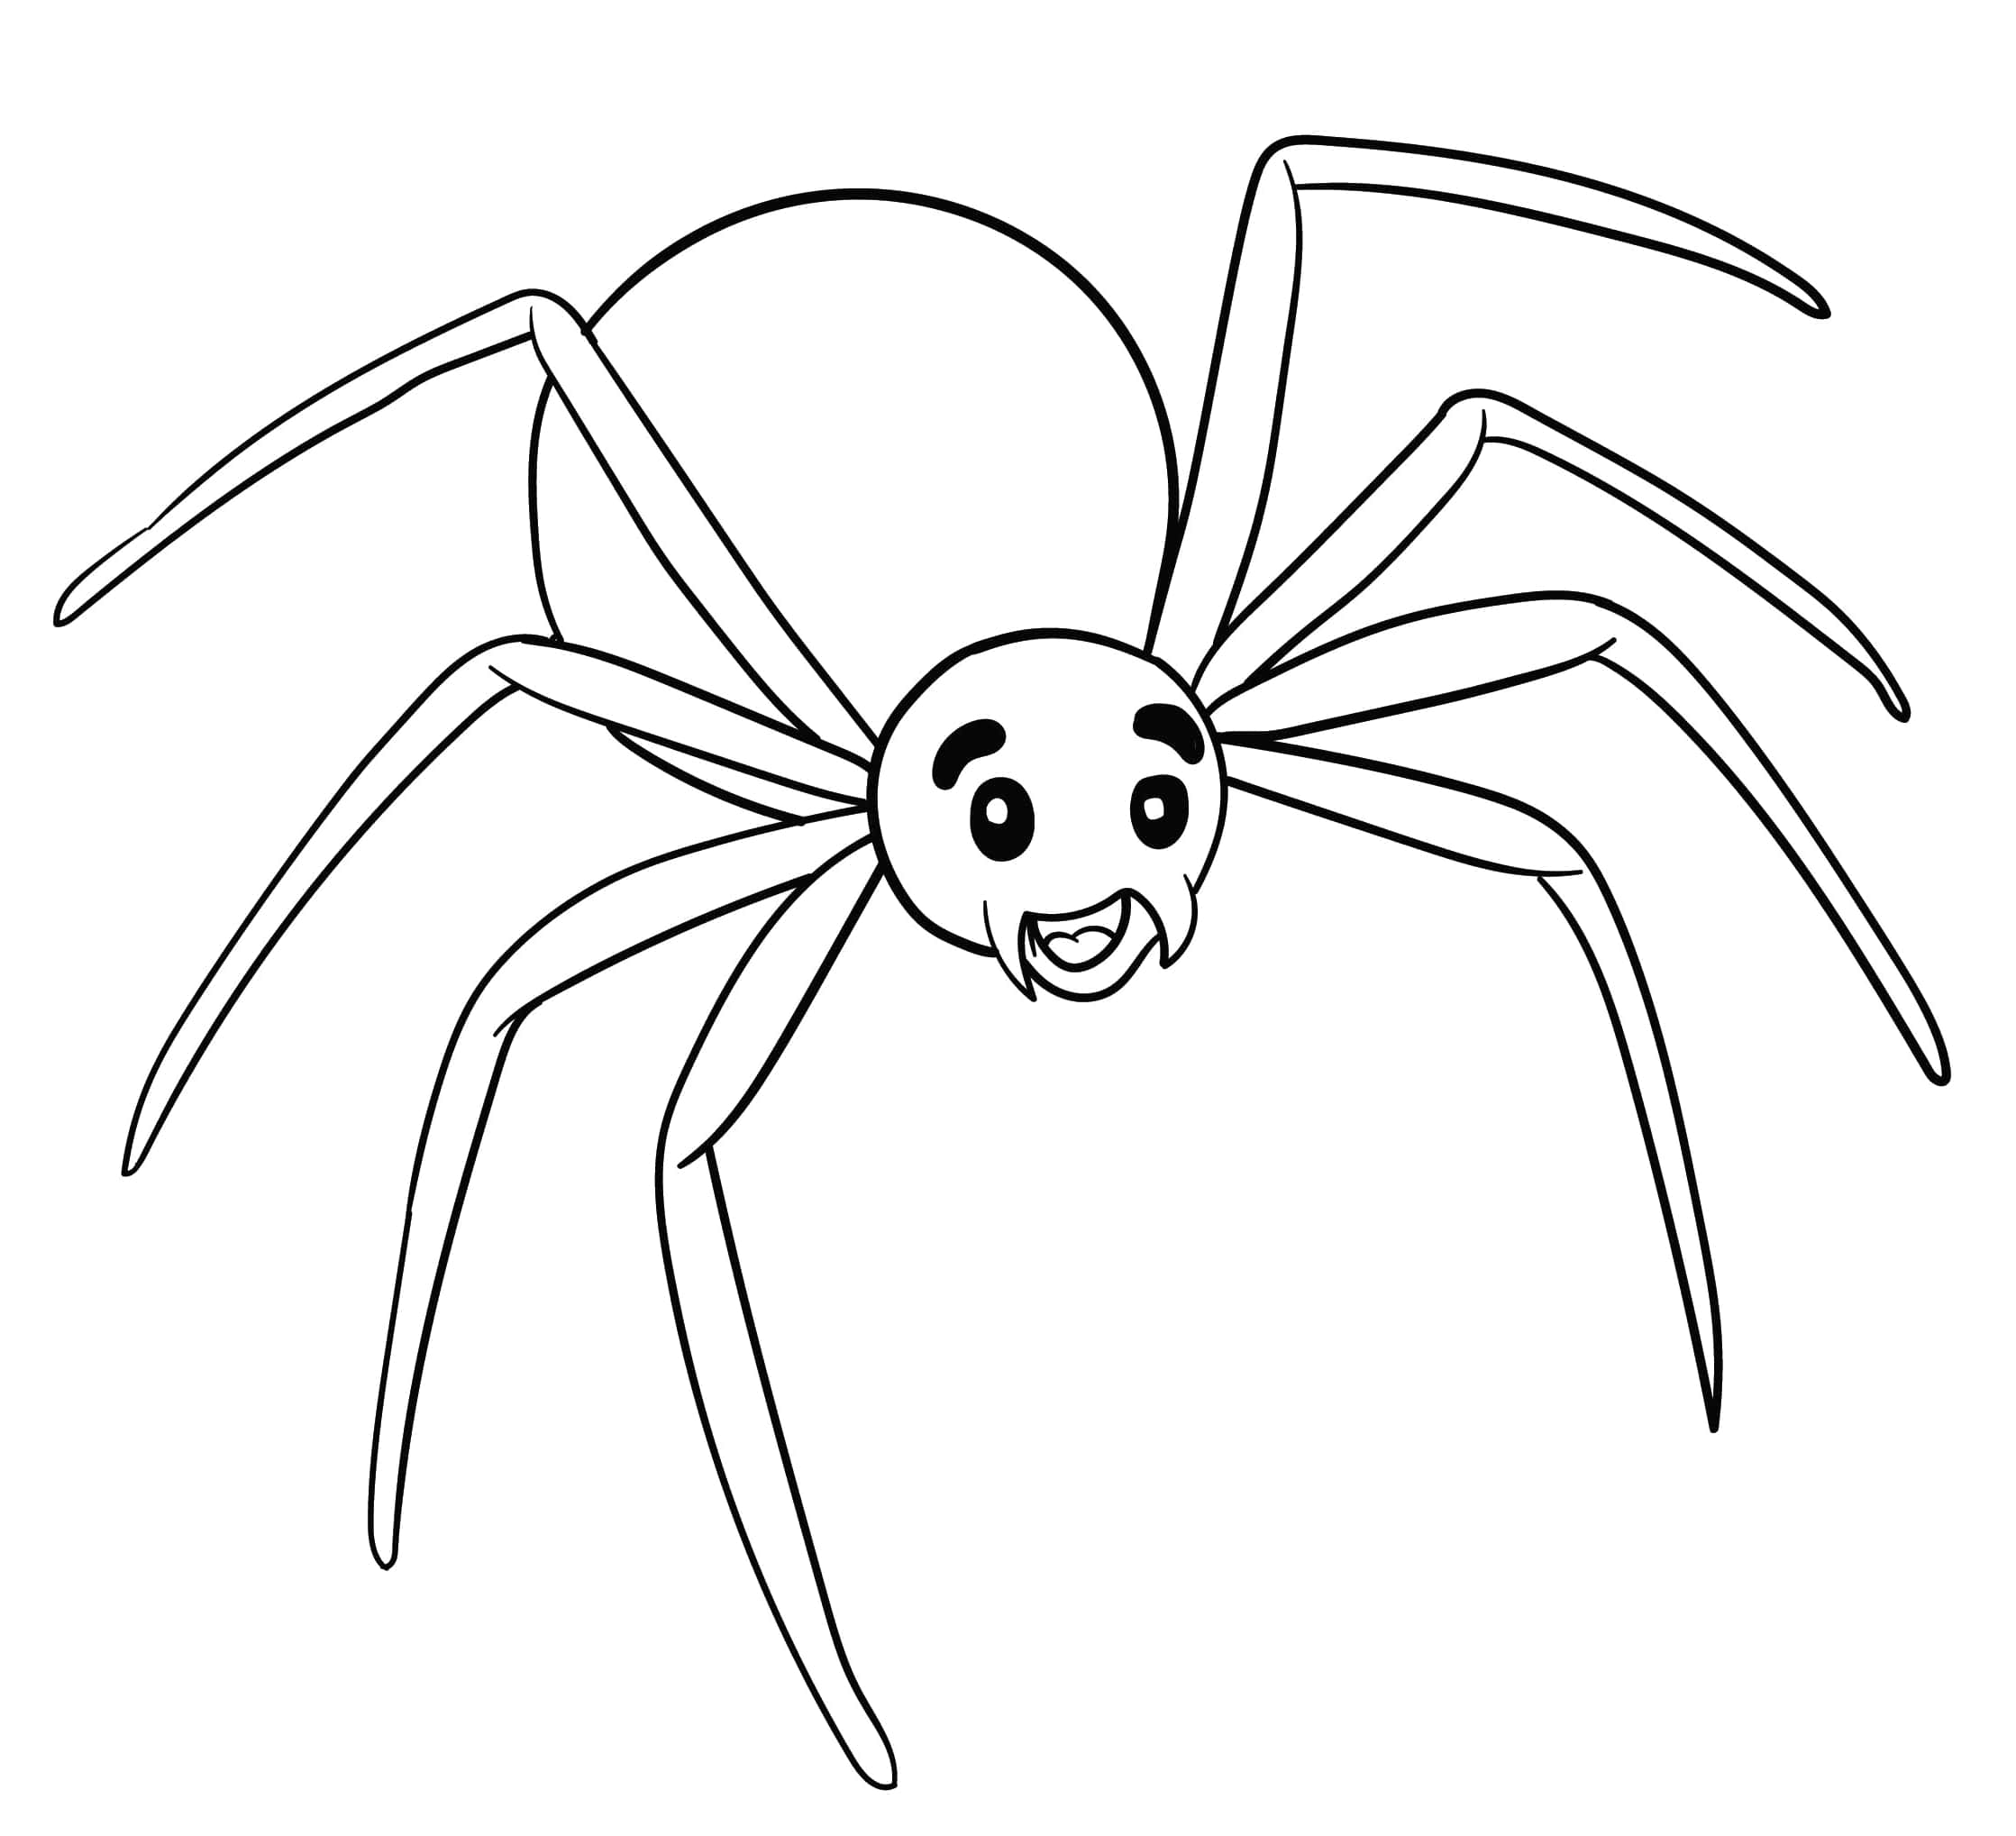 Printable Halloween Spider Coloring Pages_26933